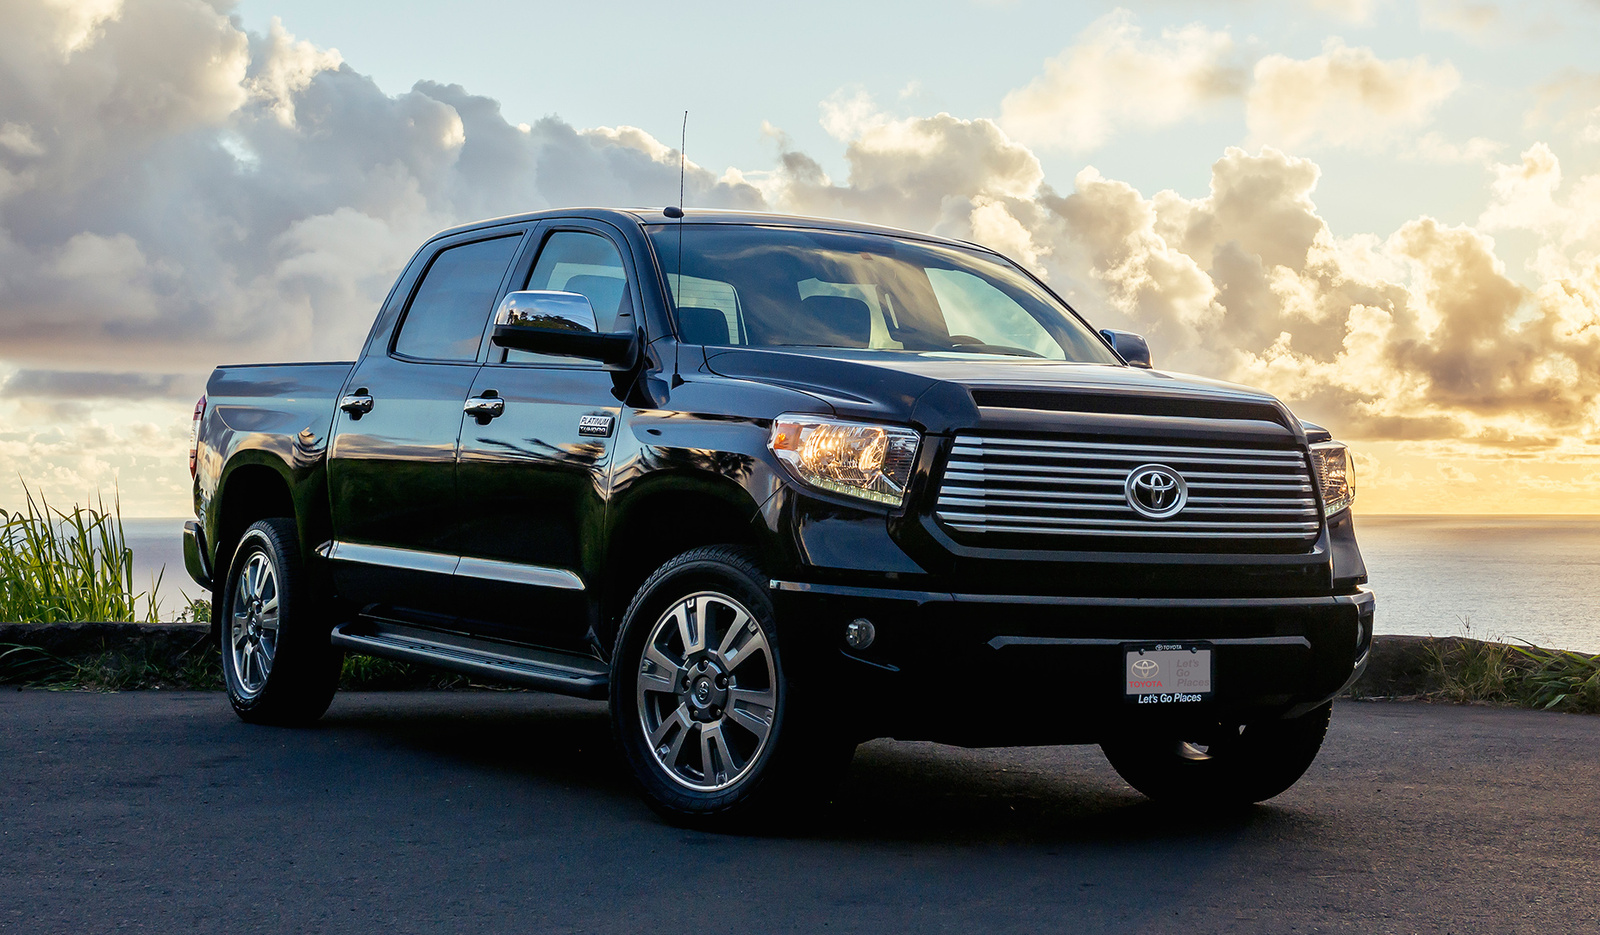 2016 Toyota Tundra: Prices, Reviews & Pictures - CarGurus